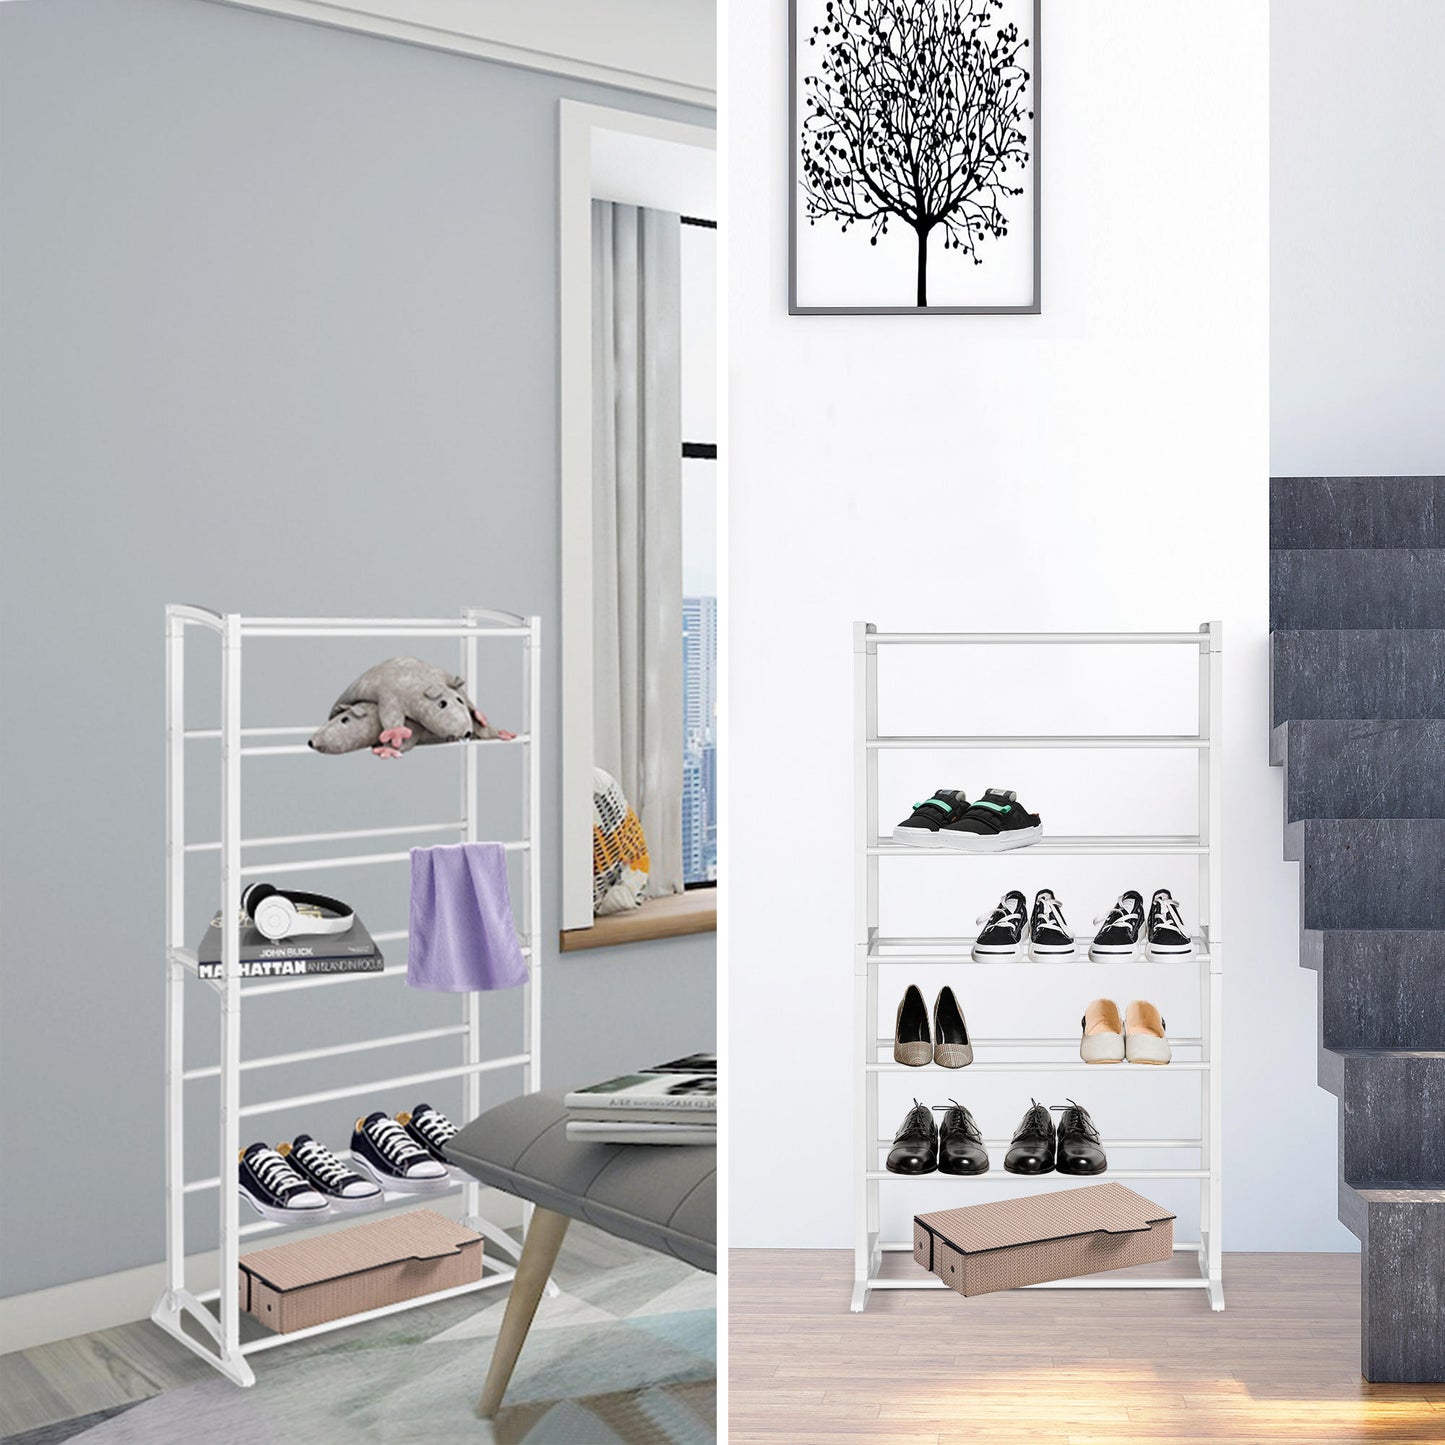 6 Layer Premium Quality Shoe Rack Suitable For Living Room